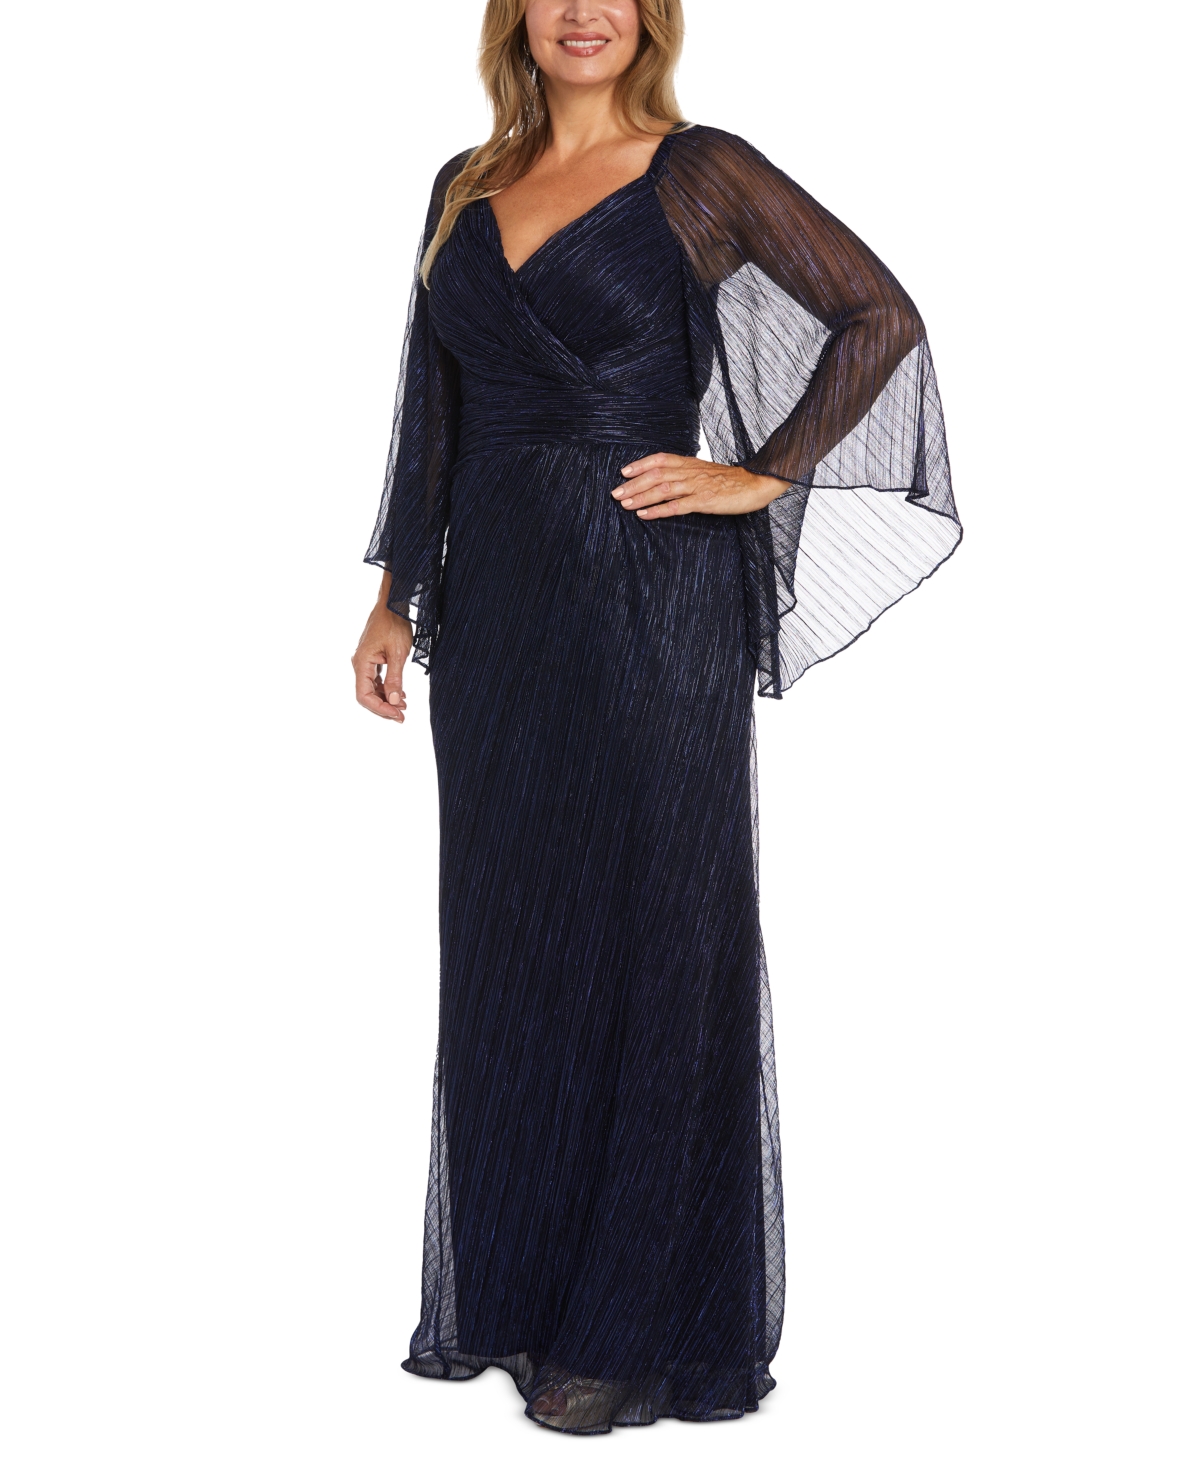 Women's Sweetheart-Neck Draped-Illusion-Sleeve Gown - Navy